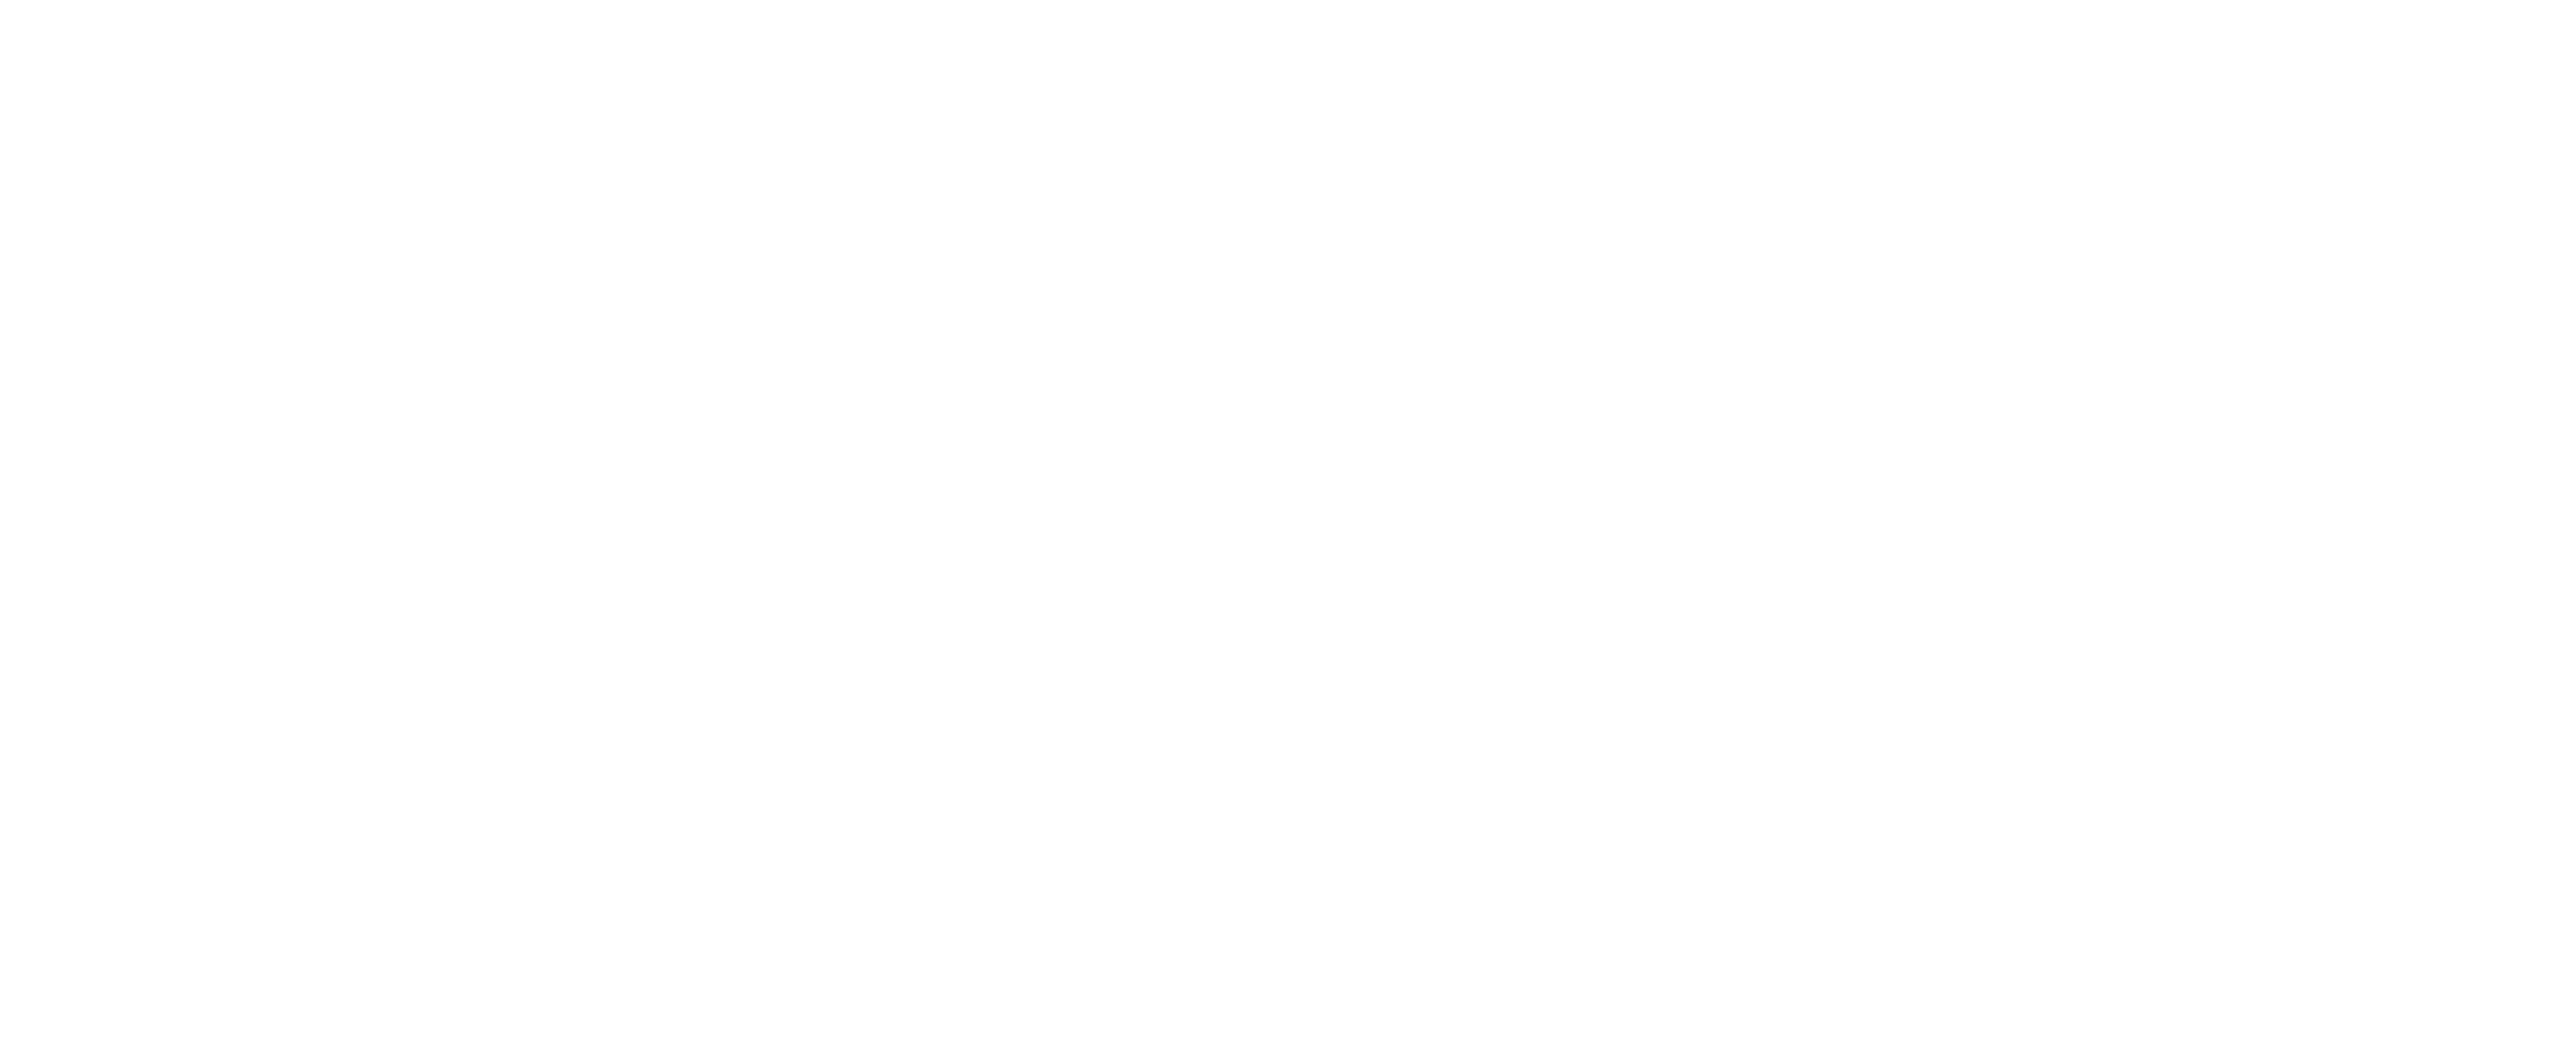 Welcome to Carroll Motel & Cottages!!